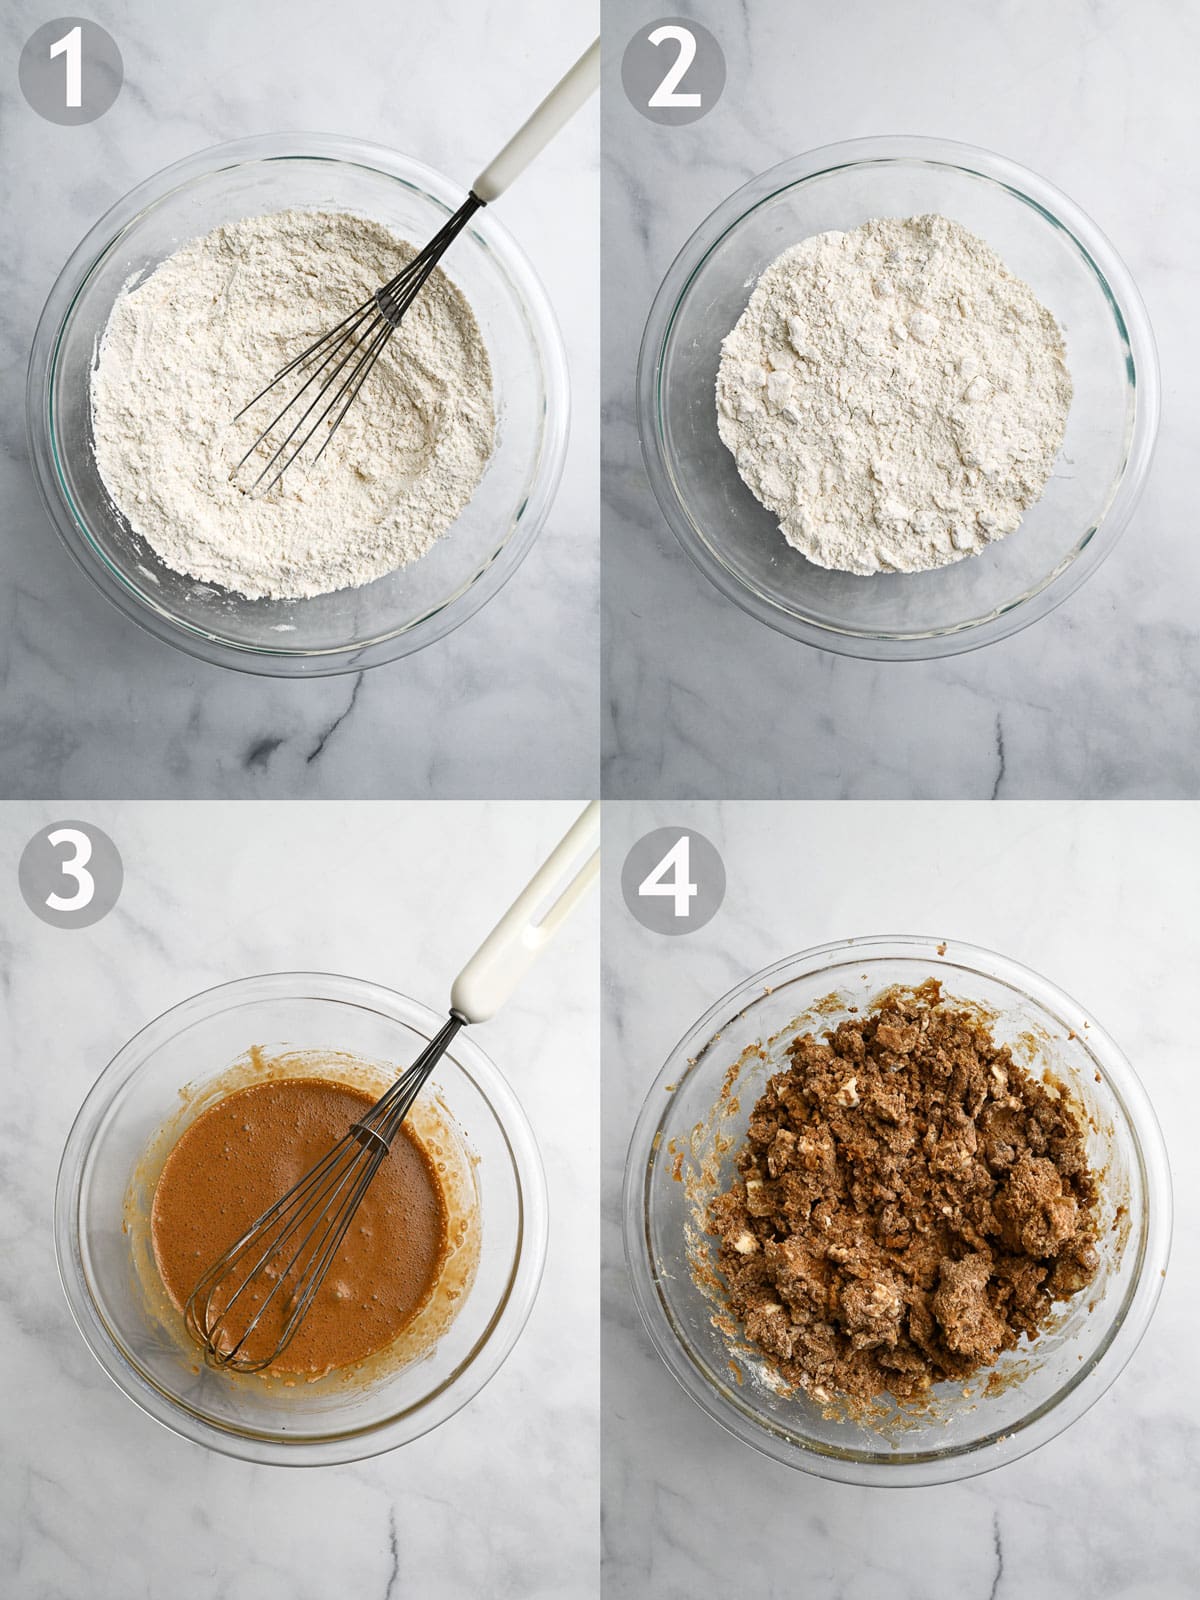 Steps to make scones including mixing dry ingredients, and adding butter and other dry ingredients.